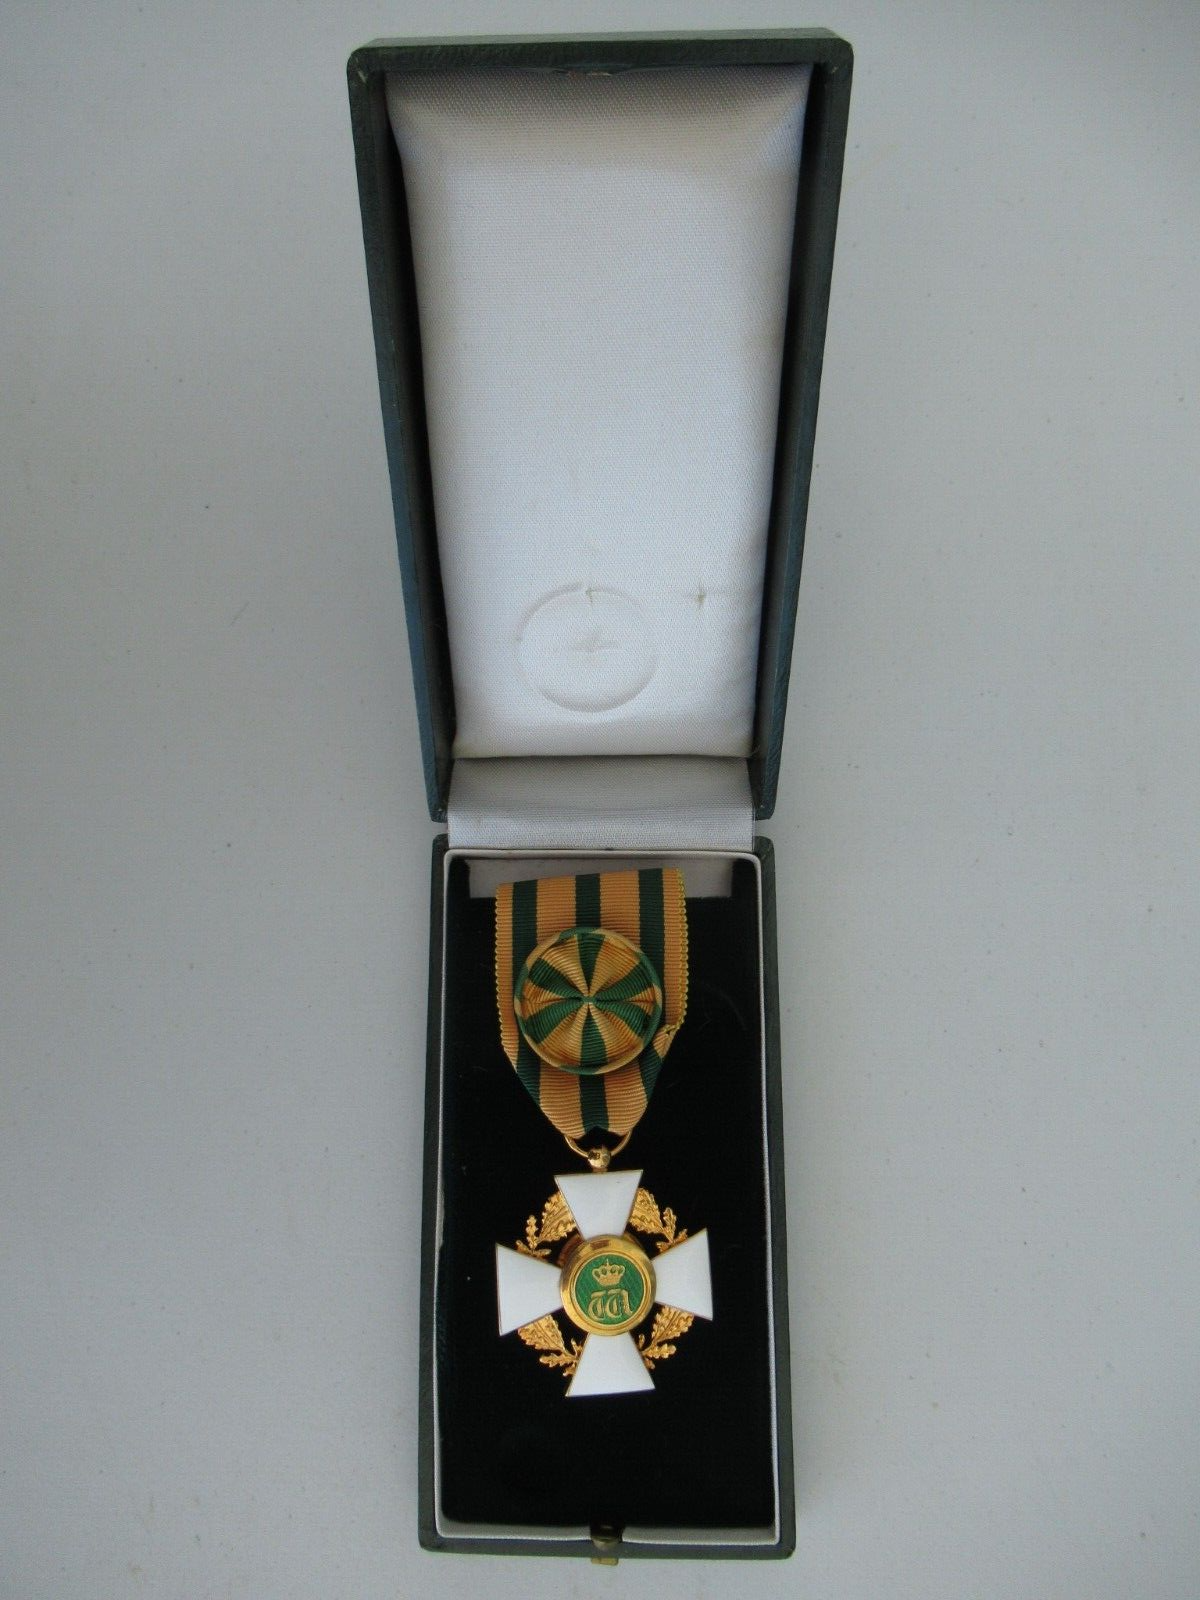 LUXEMBOURG OAKEN CROWN ORDER OFFICER GRADE CASED. SILVER. BOXED. RARE!